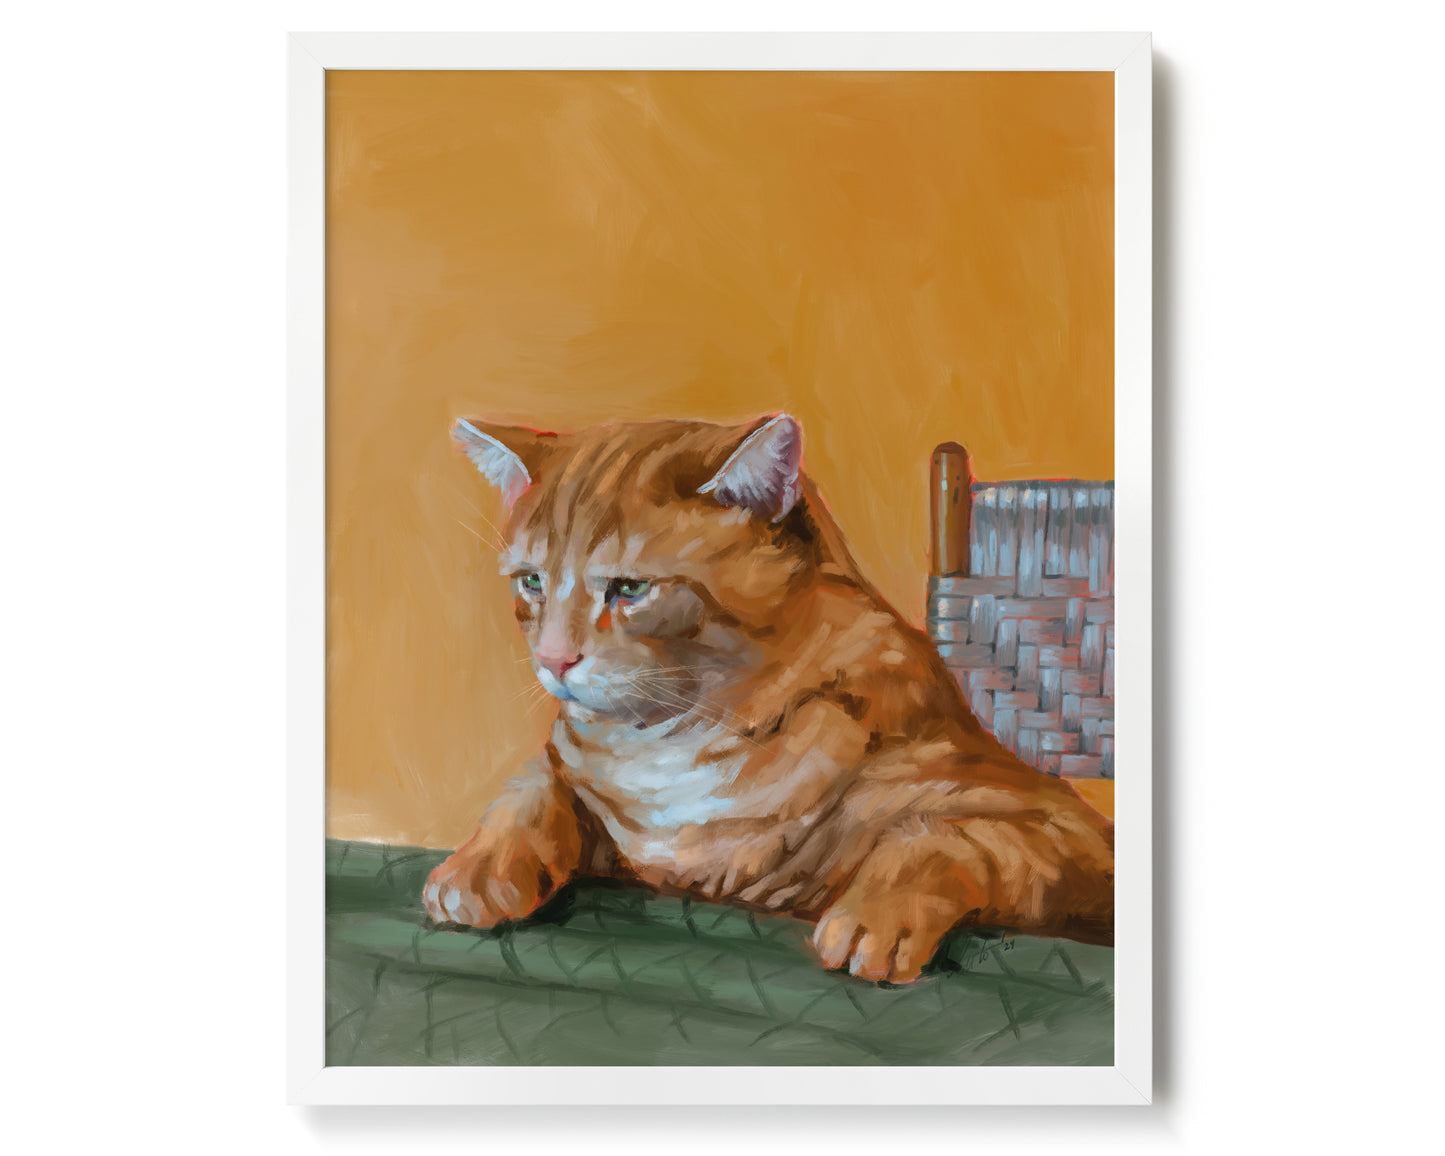 "Patapon" by Catherine Hébert - Orange Tabby Cat At The Dinner Table Art Print - 16"x20" size